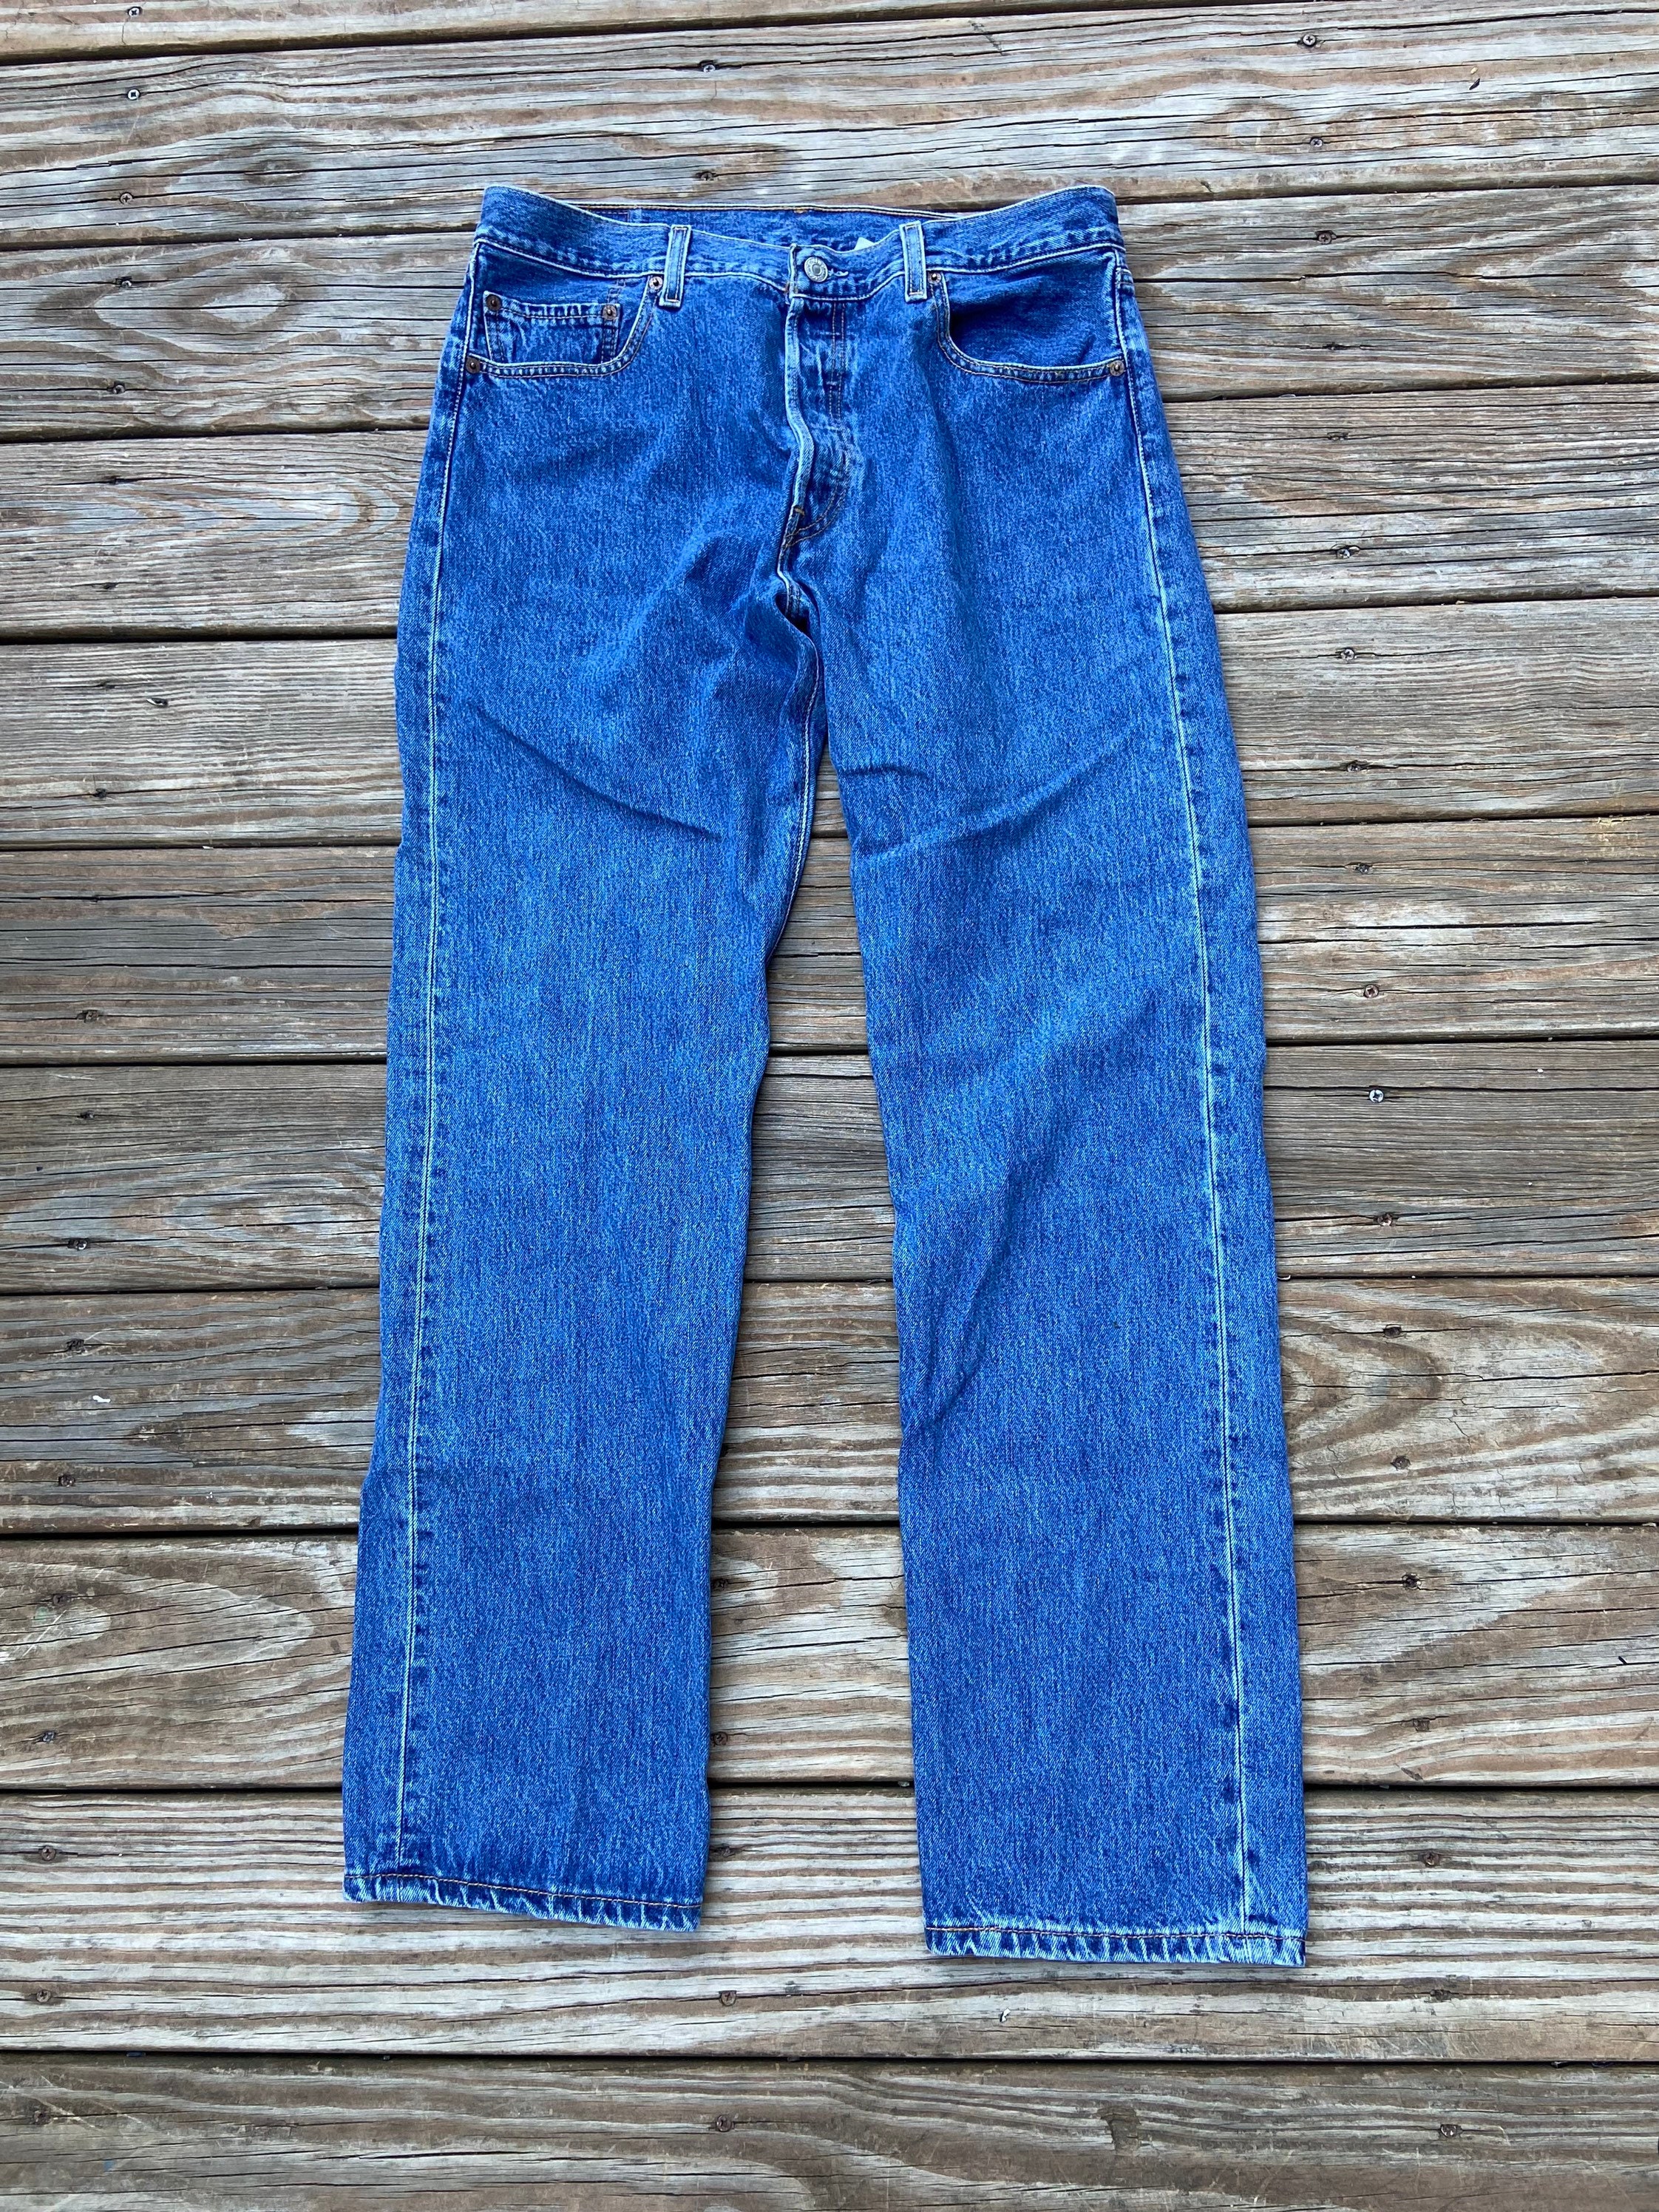 Mexican Made Levis - Etsy